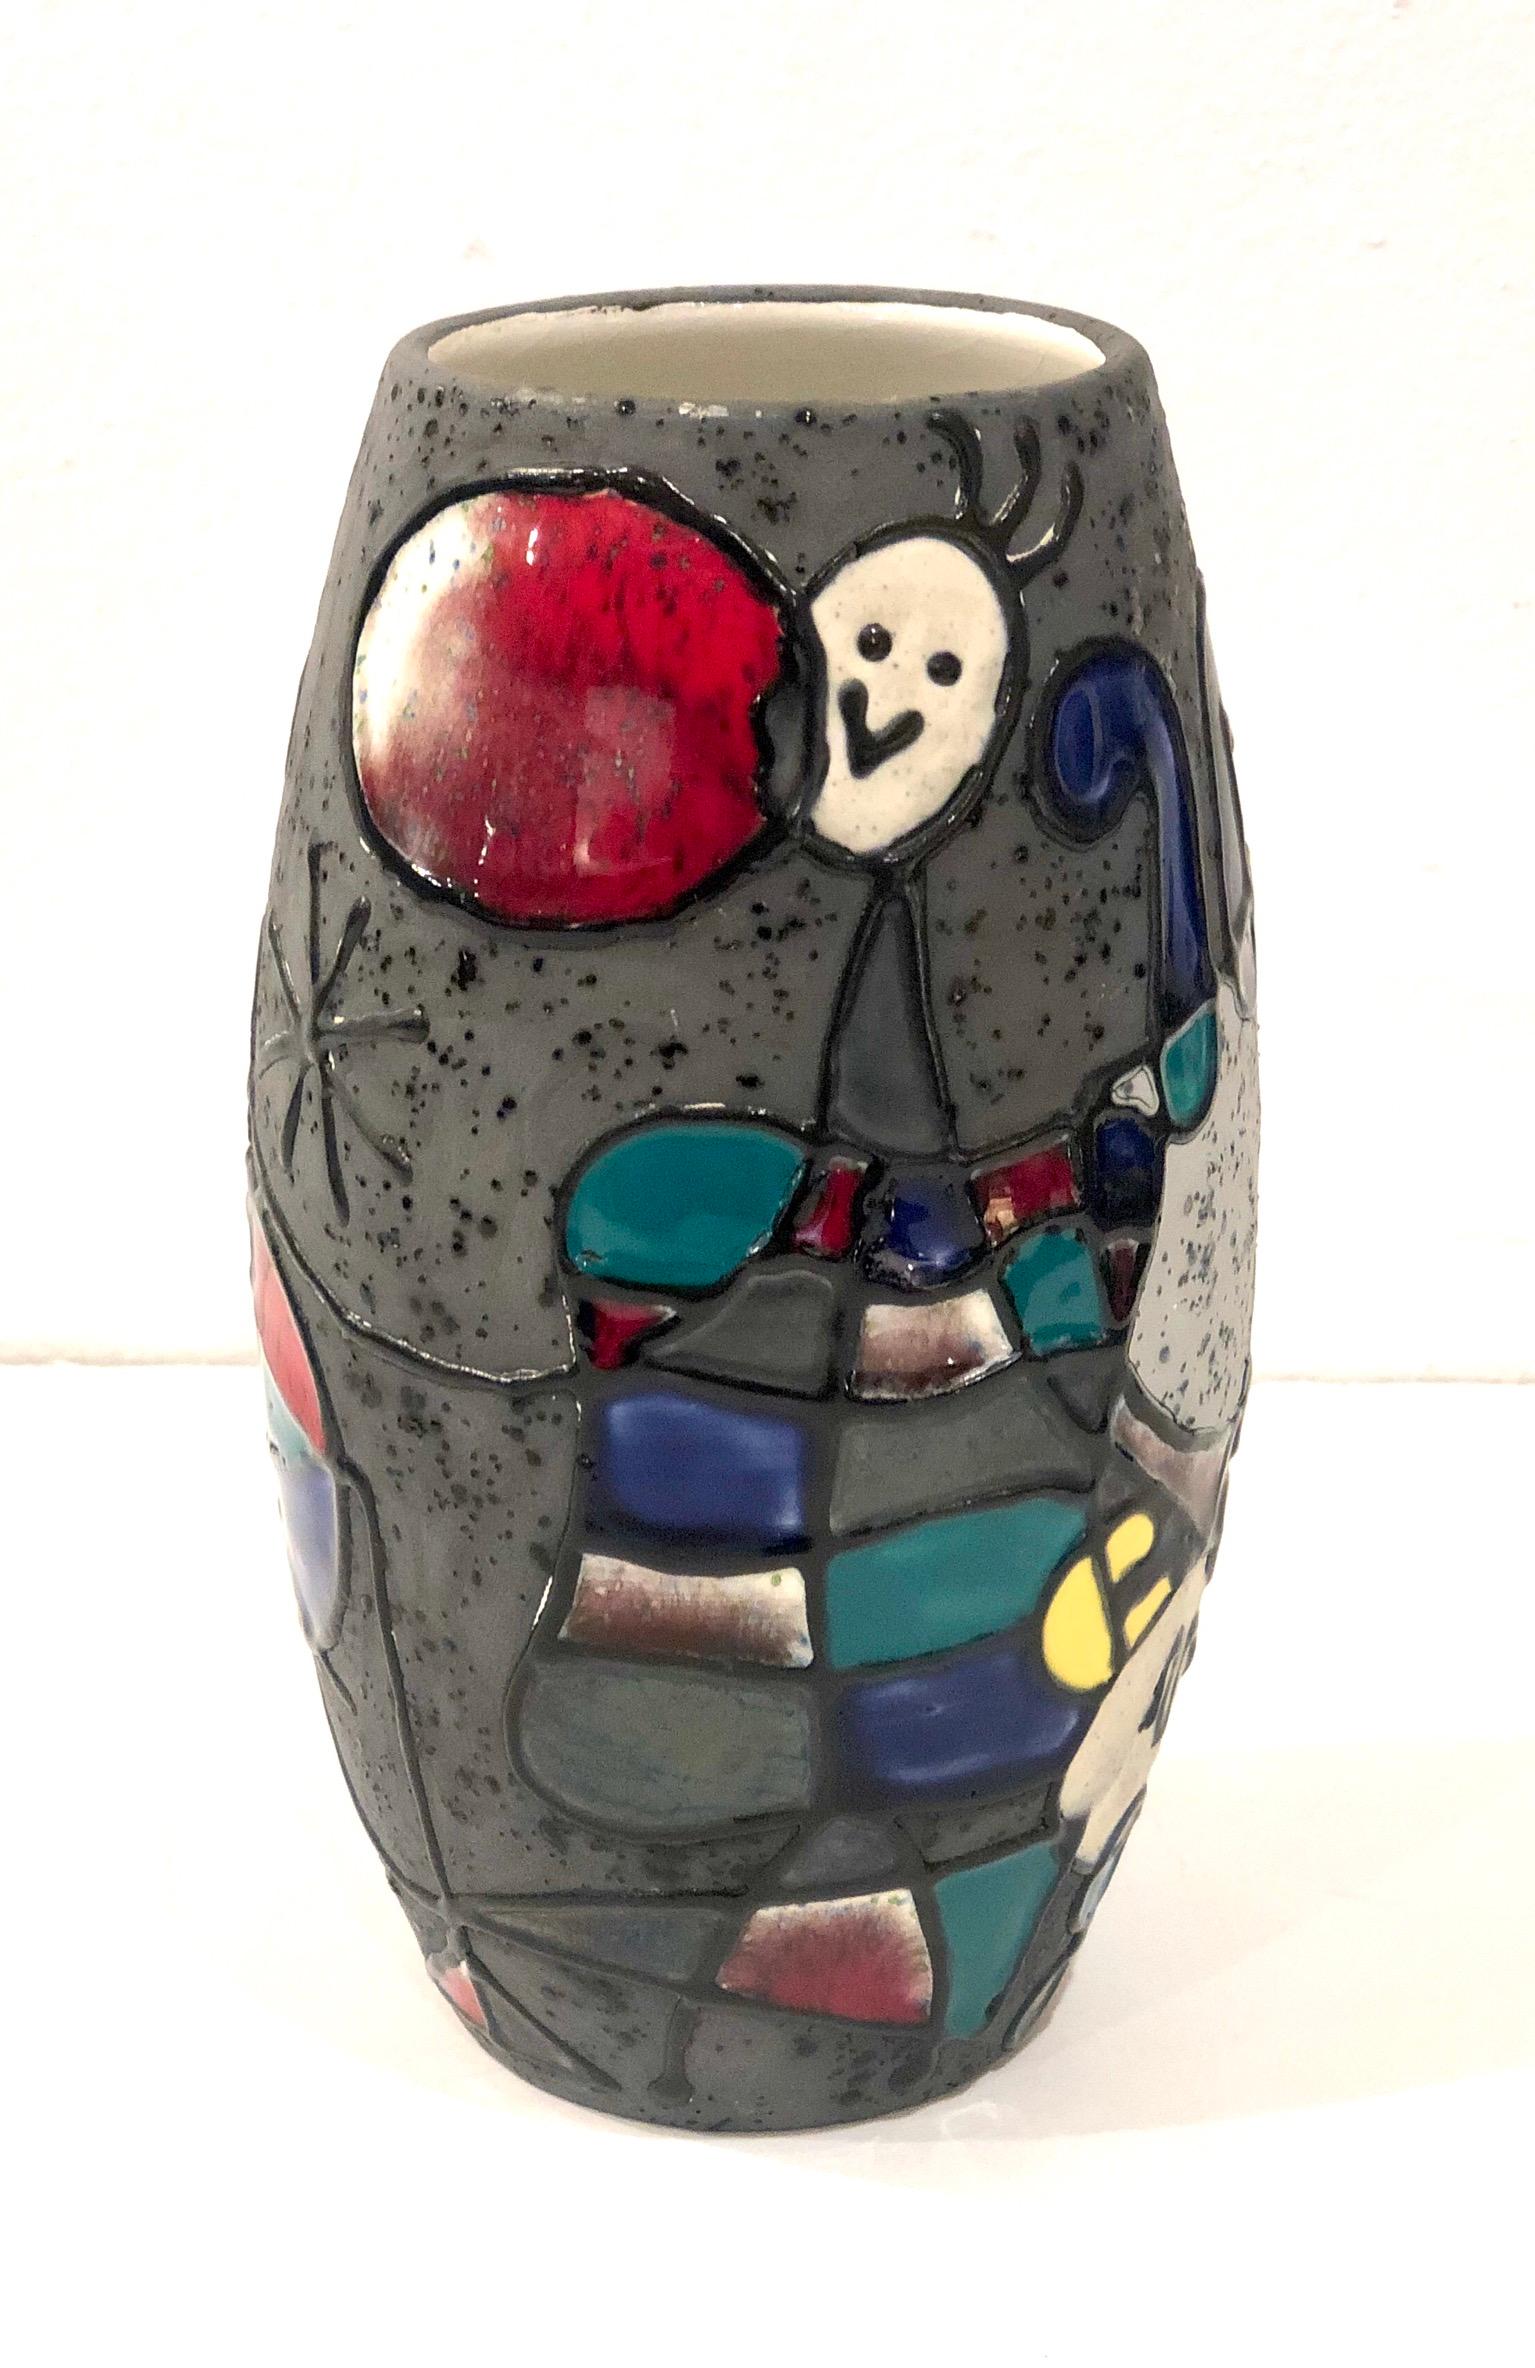 Beautiful hand painted ceramic vase after Joan Miró, Made in Italy circa 1950s , glazed in white inside with Joan Miro graphics, excellent condition. Signed at the bottom in gold Made in Italy by Le Felie.